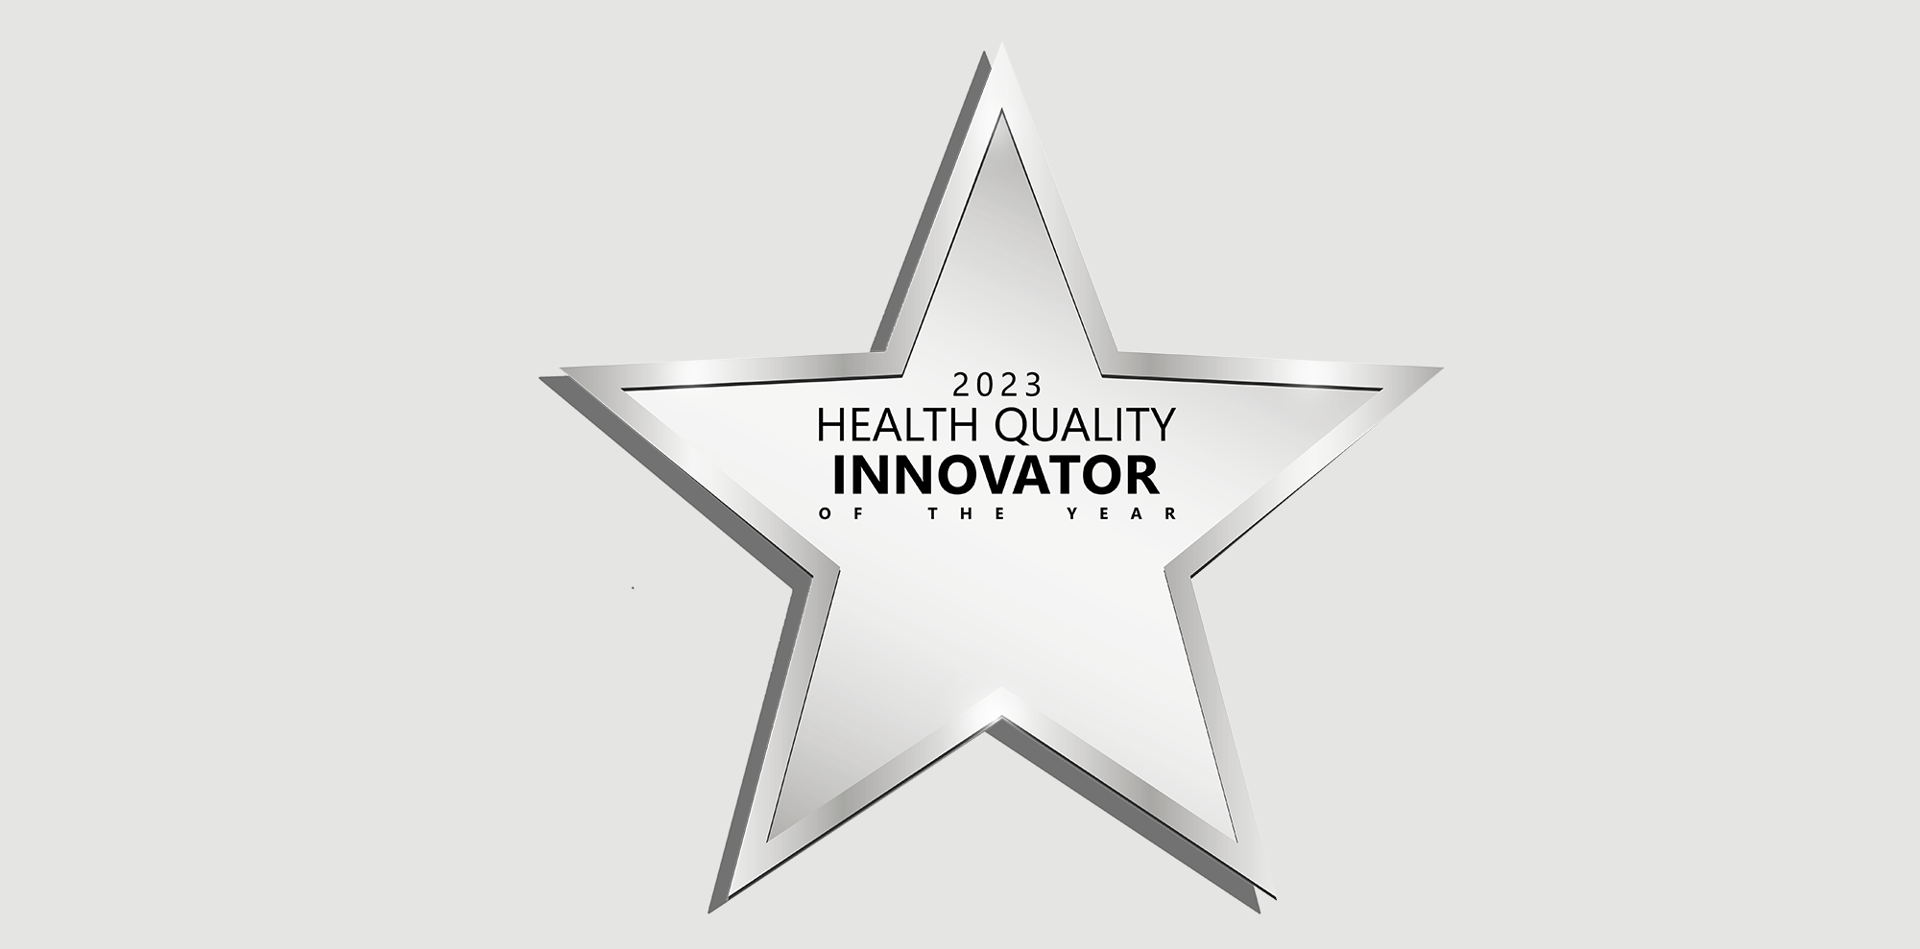 Evangelical Community Hospital Selected as a 2023 Health Quality Innovator of the Year